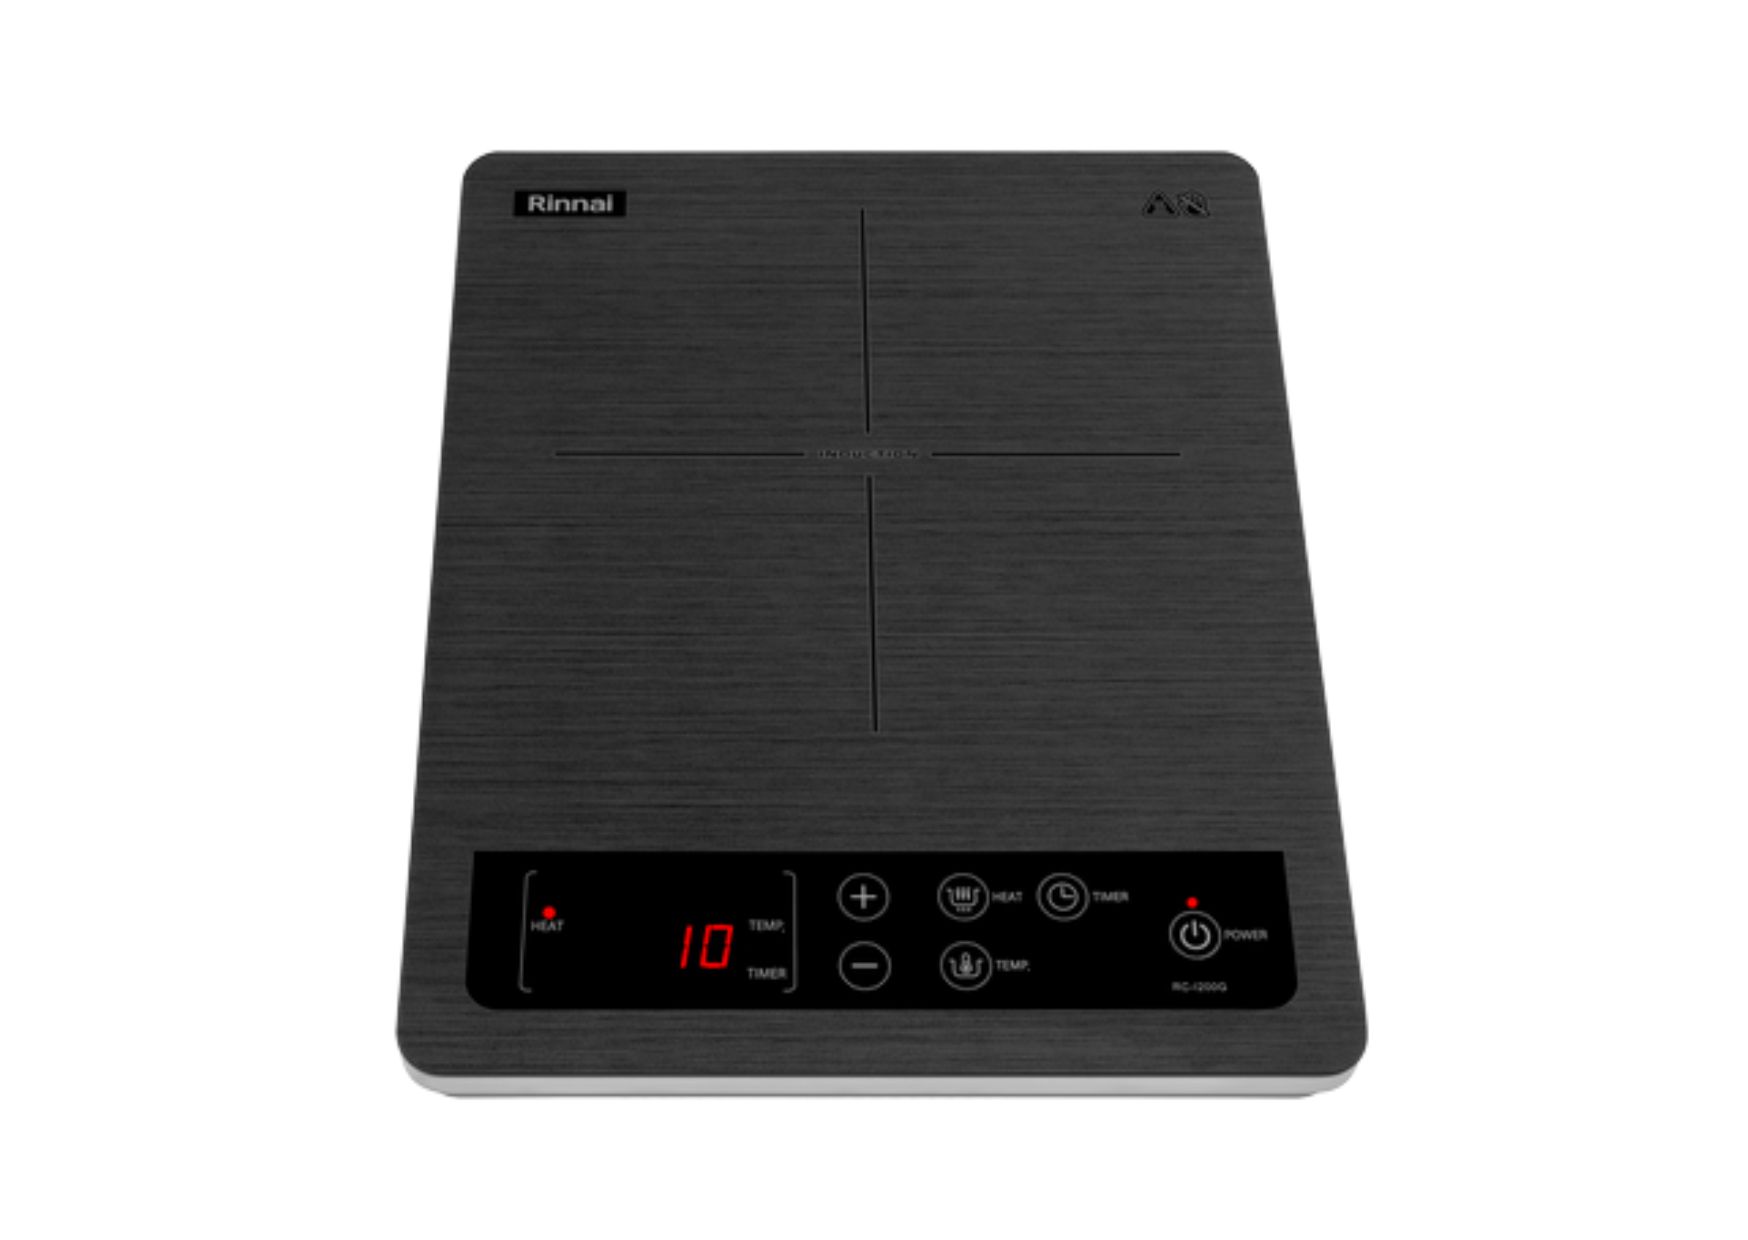 Induction portable hob with touch control